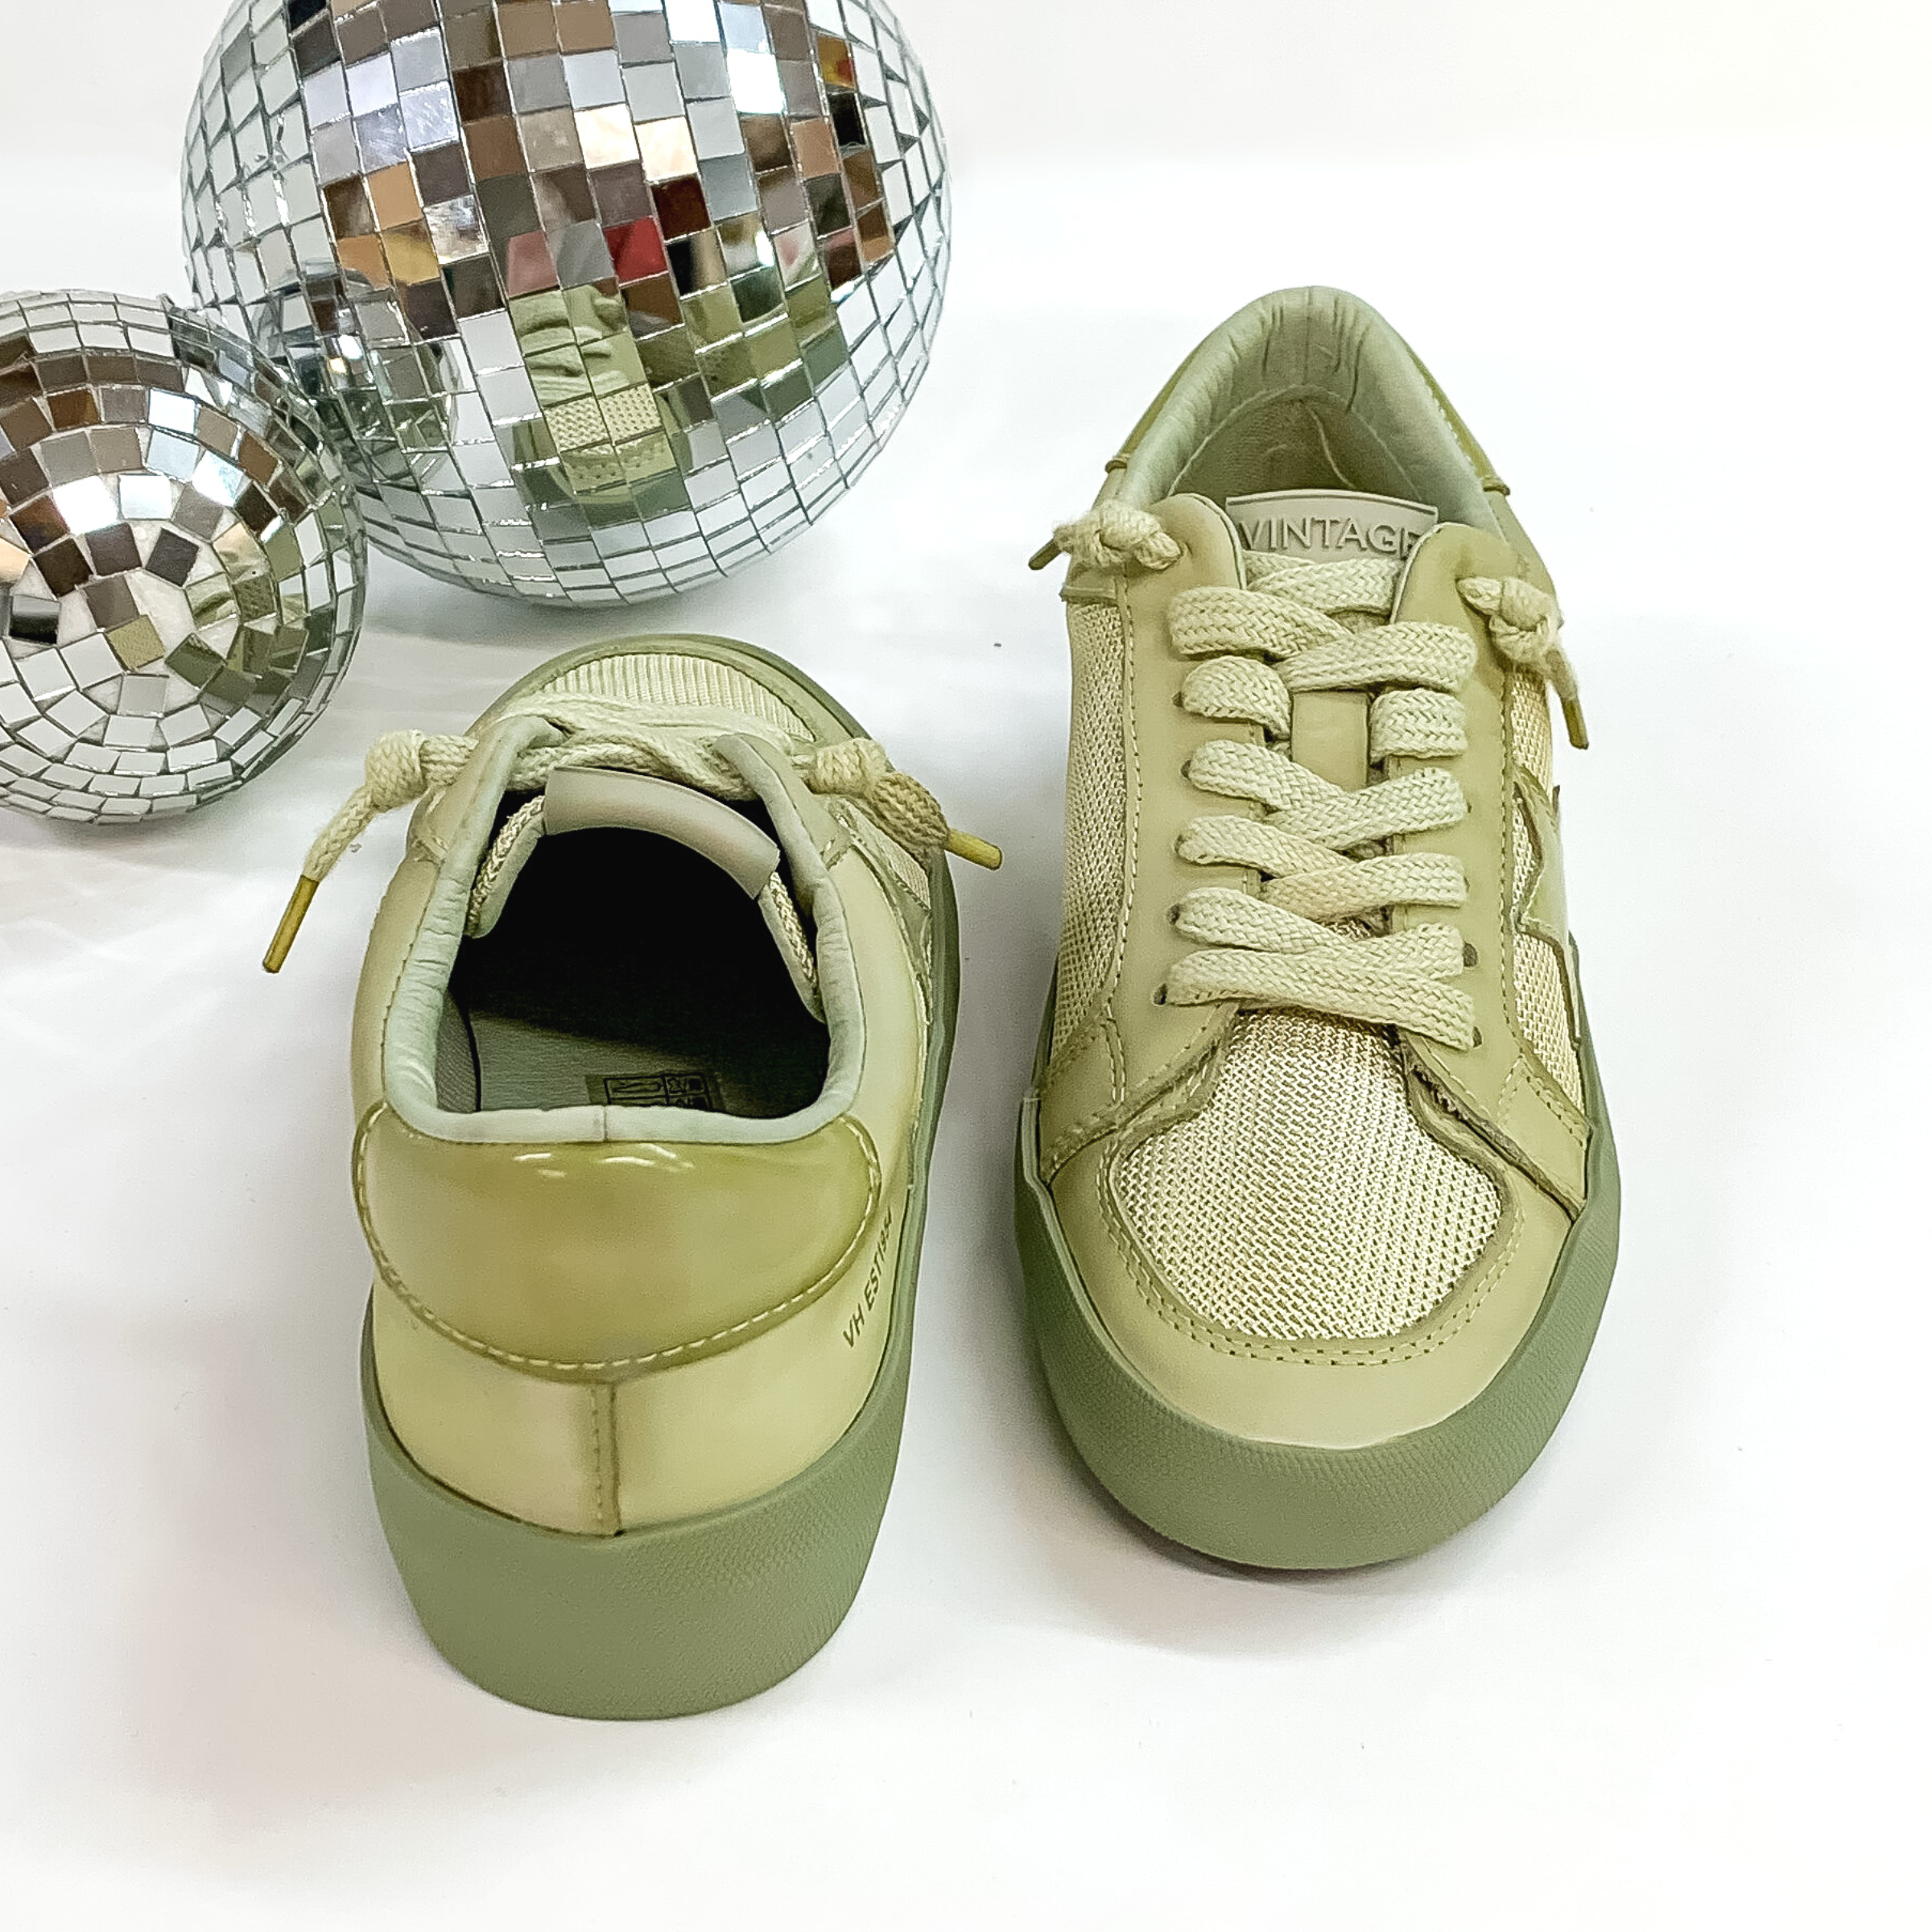 Vintage Havana | Extra Dip Dye Sneakers in Olive Green - Giddy Up Glamour Boutique